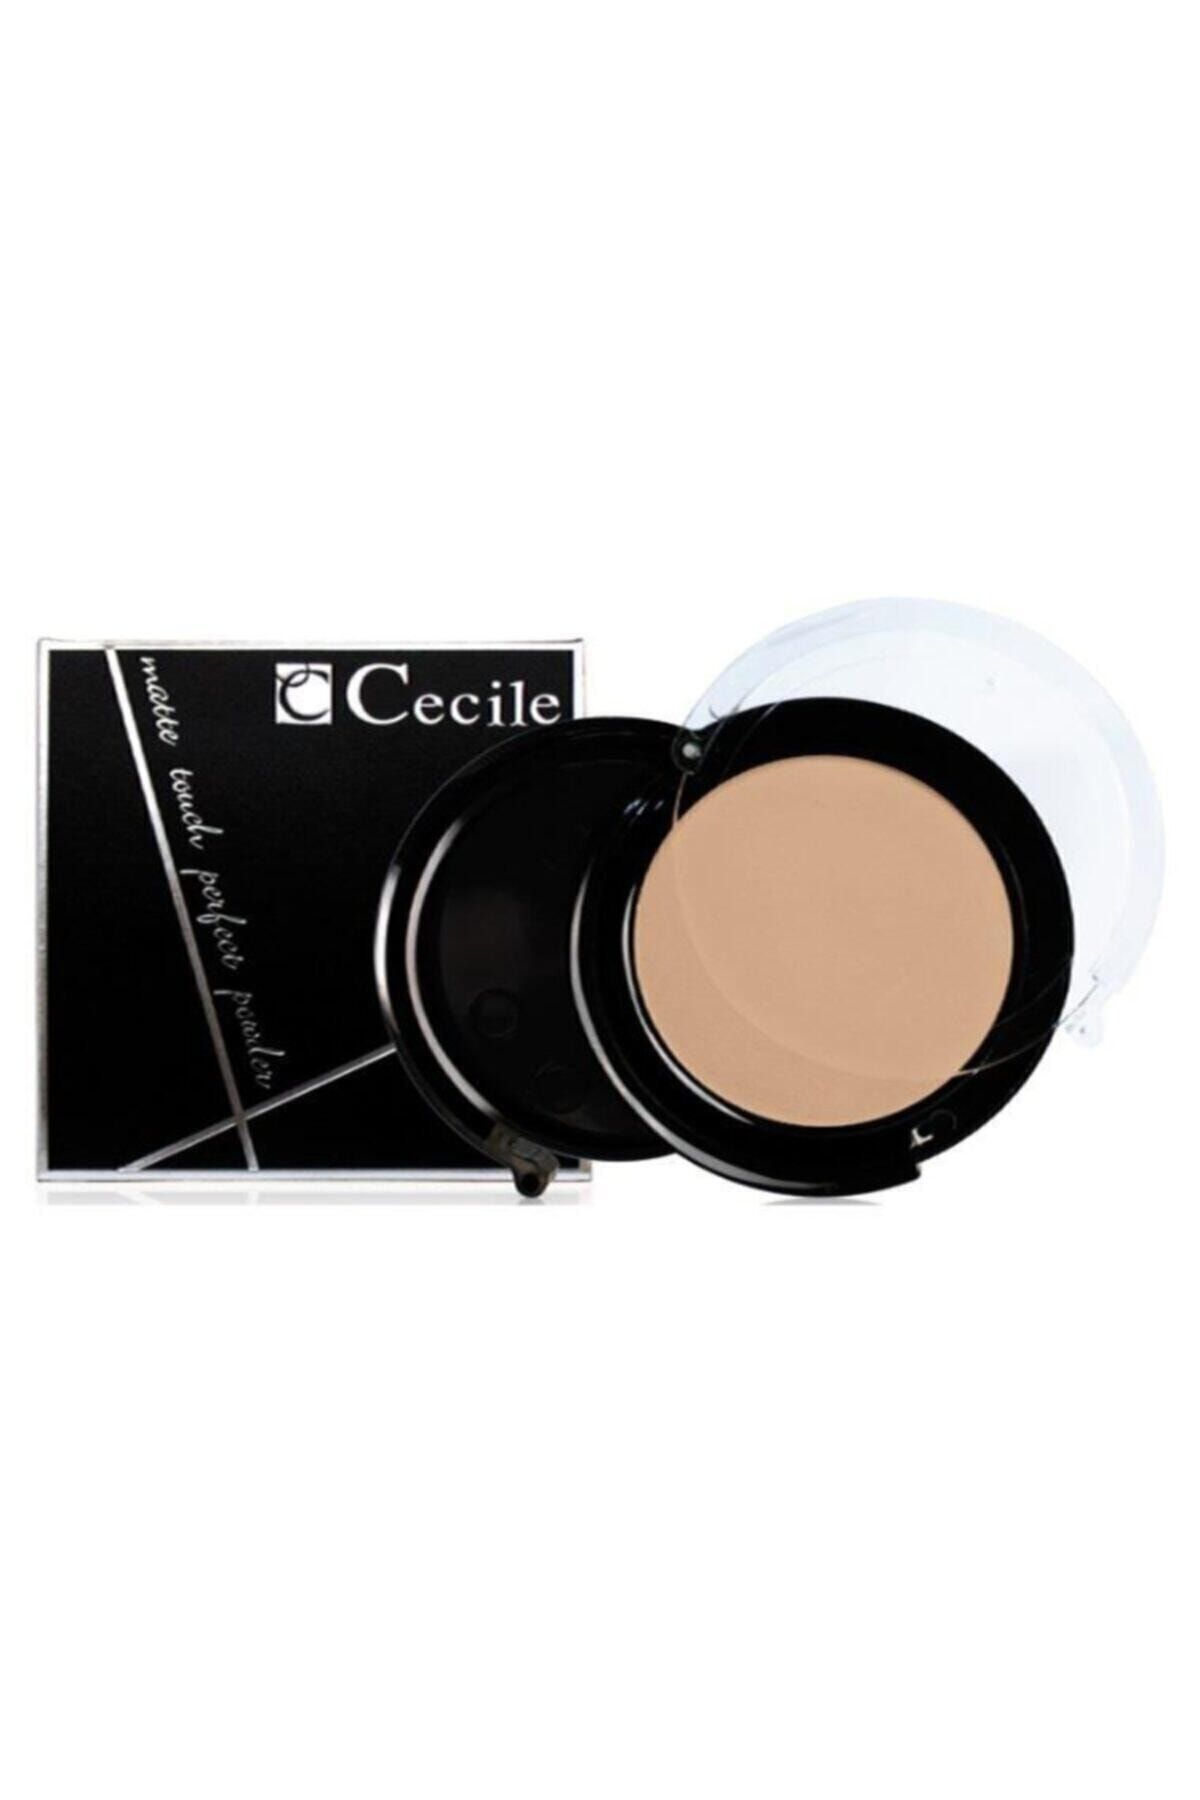 Cecile Matte Touch Perfect Powder Pudra 504 Soft Sand